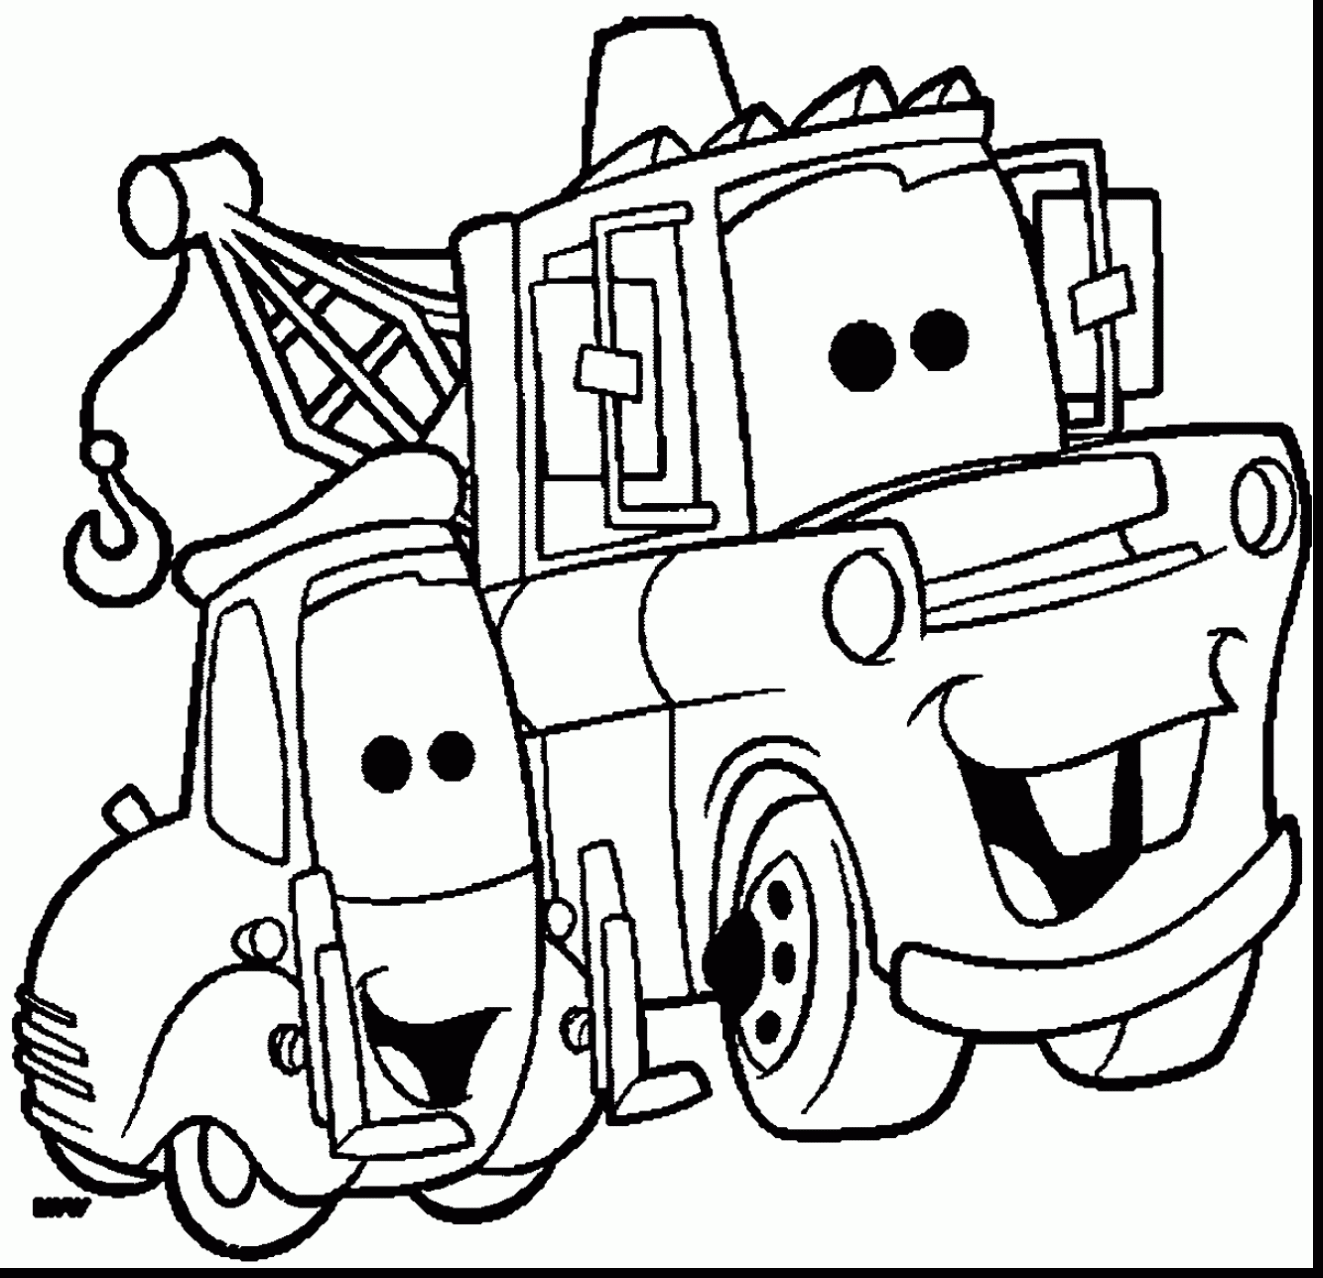 Download Guido And Matter Smiling Coloring Page - Free Printable Coloring Pages for Kids